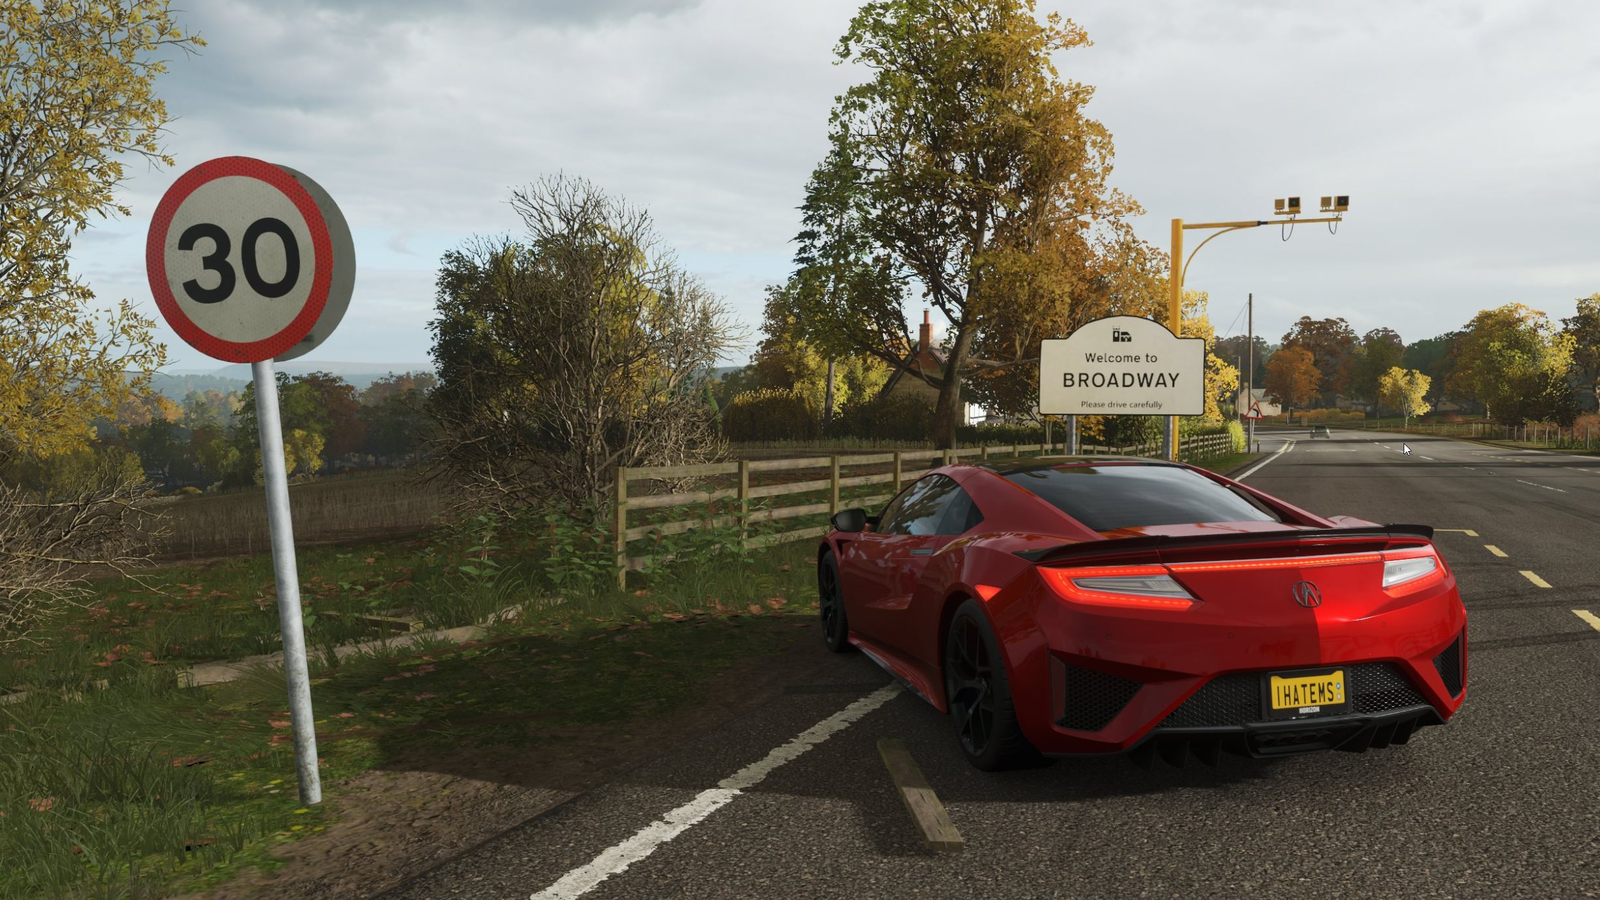 Forza Horizon 4 review: the best of Britain